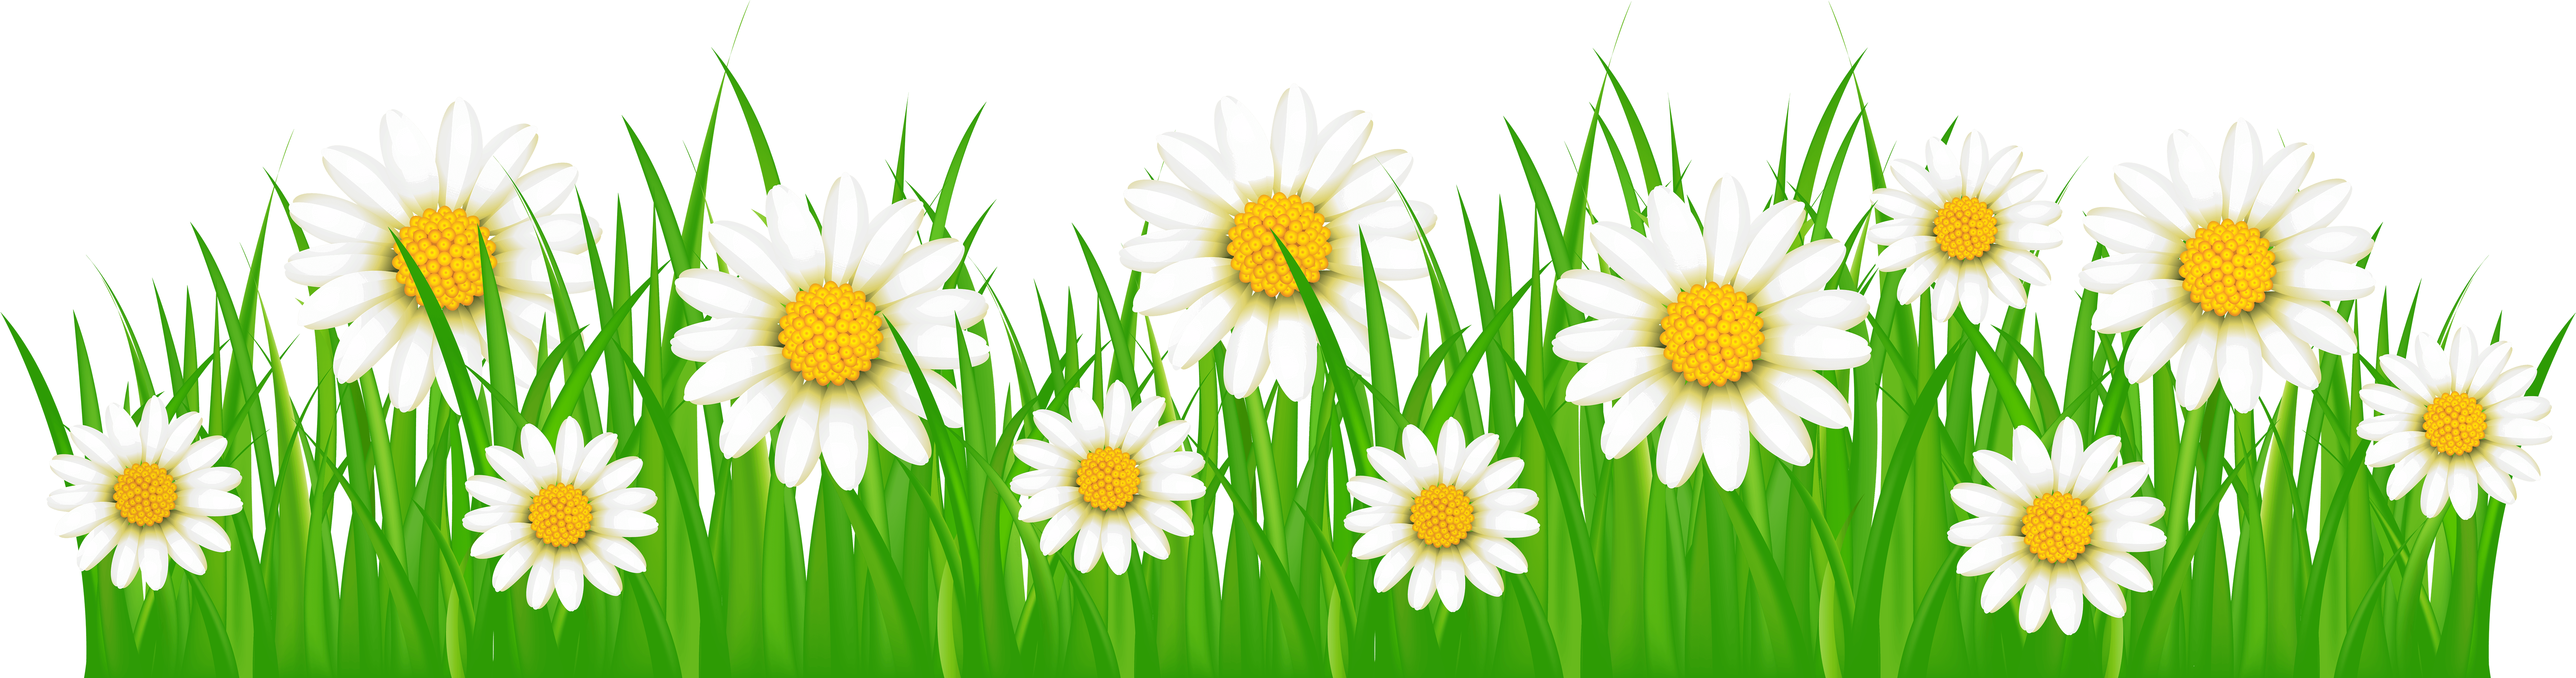 A Group Of White Flowers In Grass